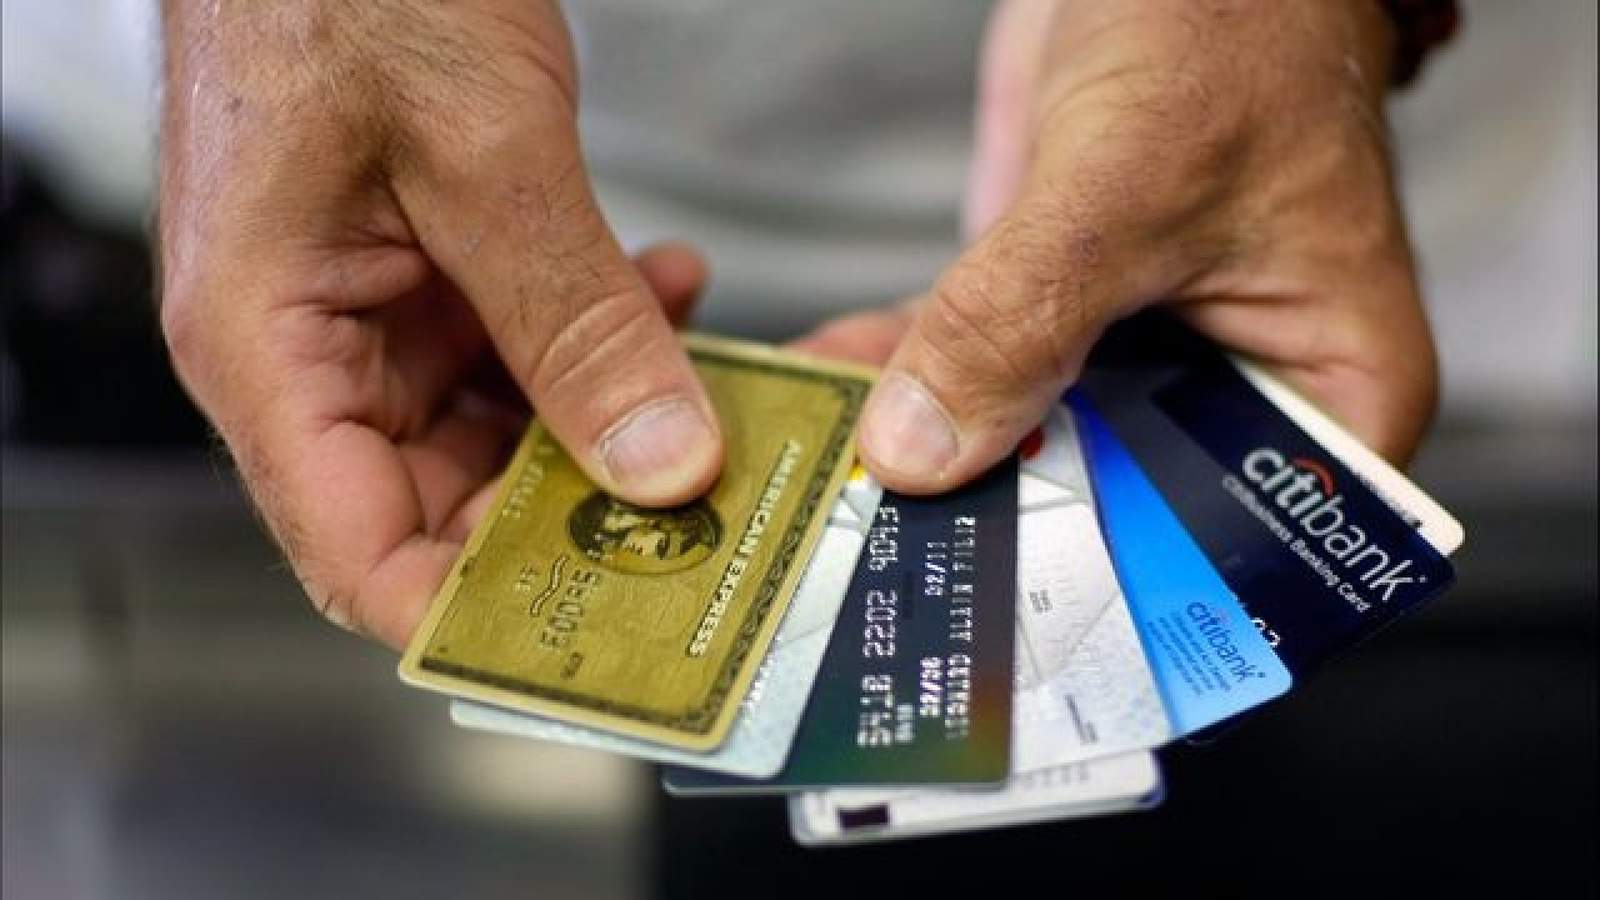 FTC warns consumers of bogus credit card interest rate reduction offers